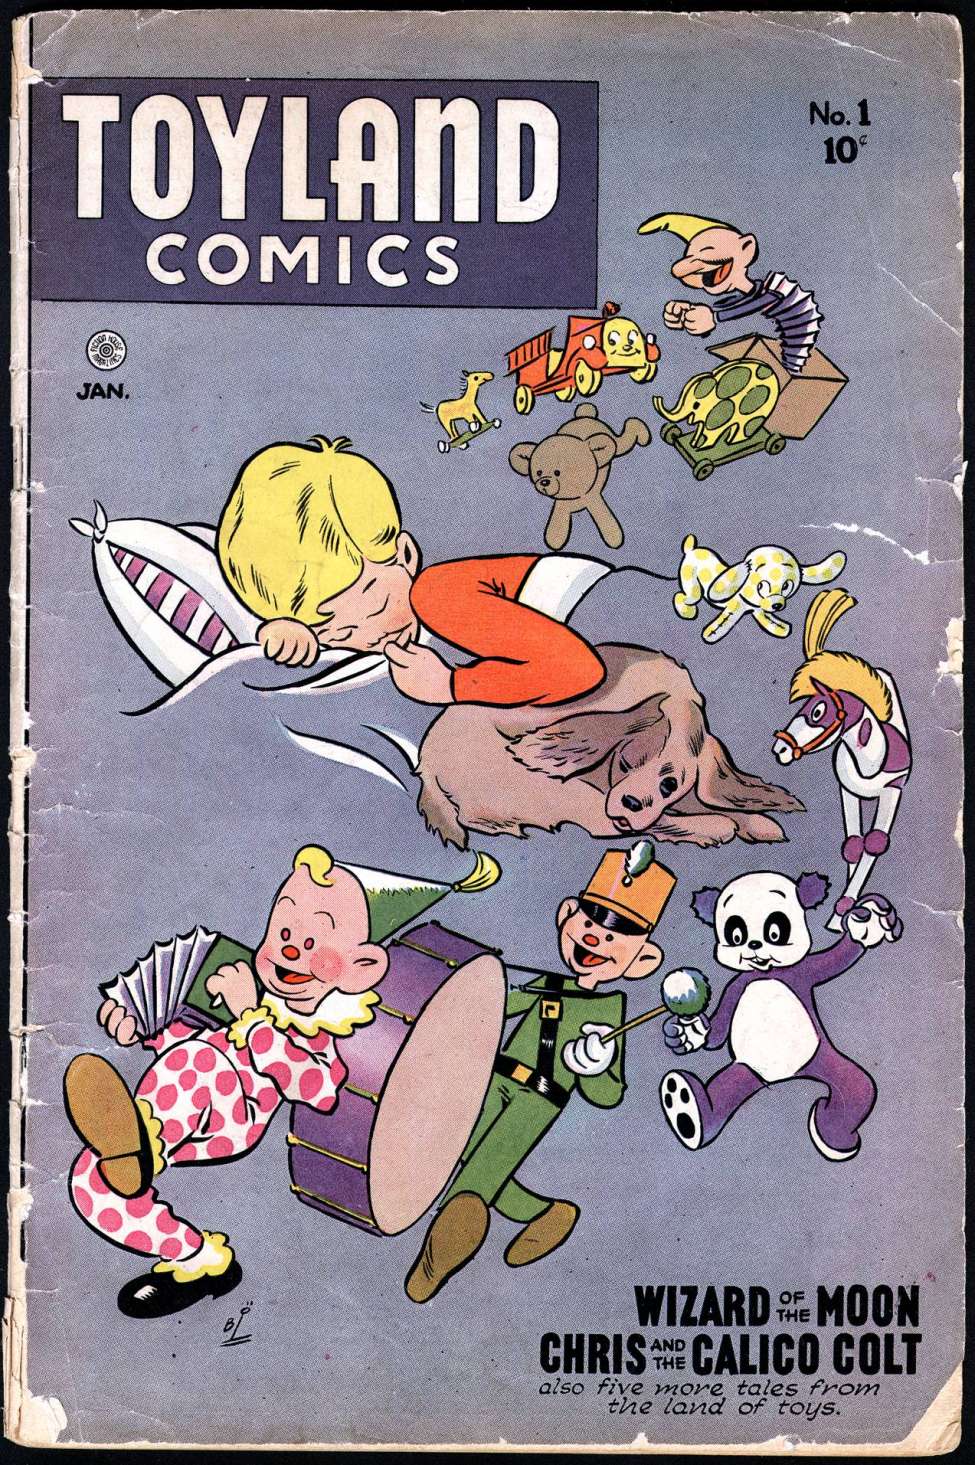 Book Cover For Toyland Comics 1